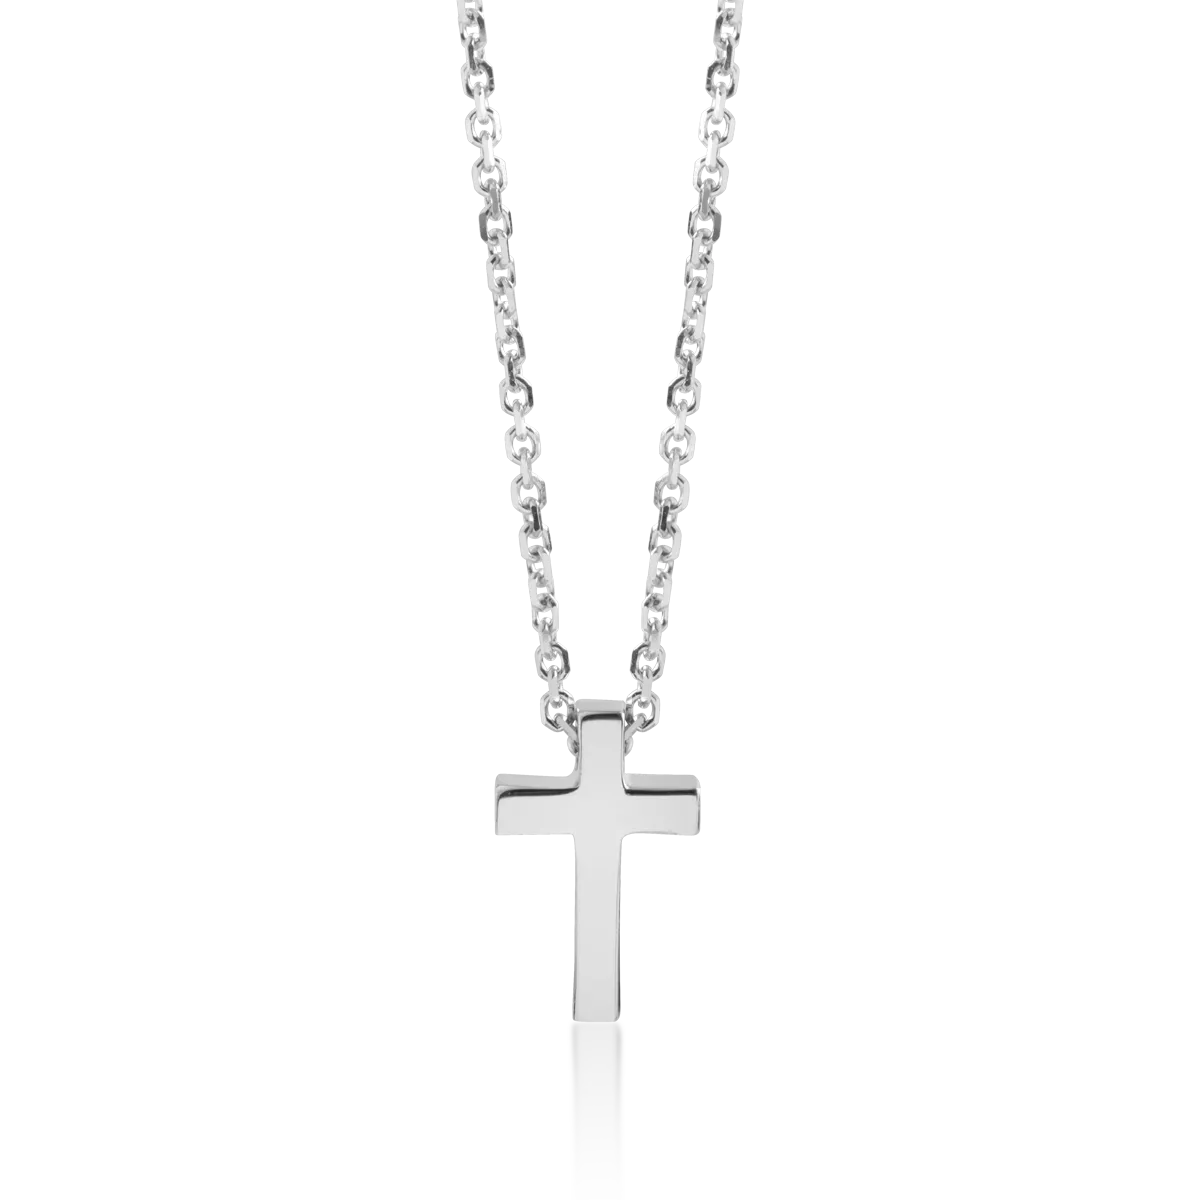 14K white gold cross necklace with pendant